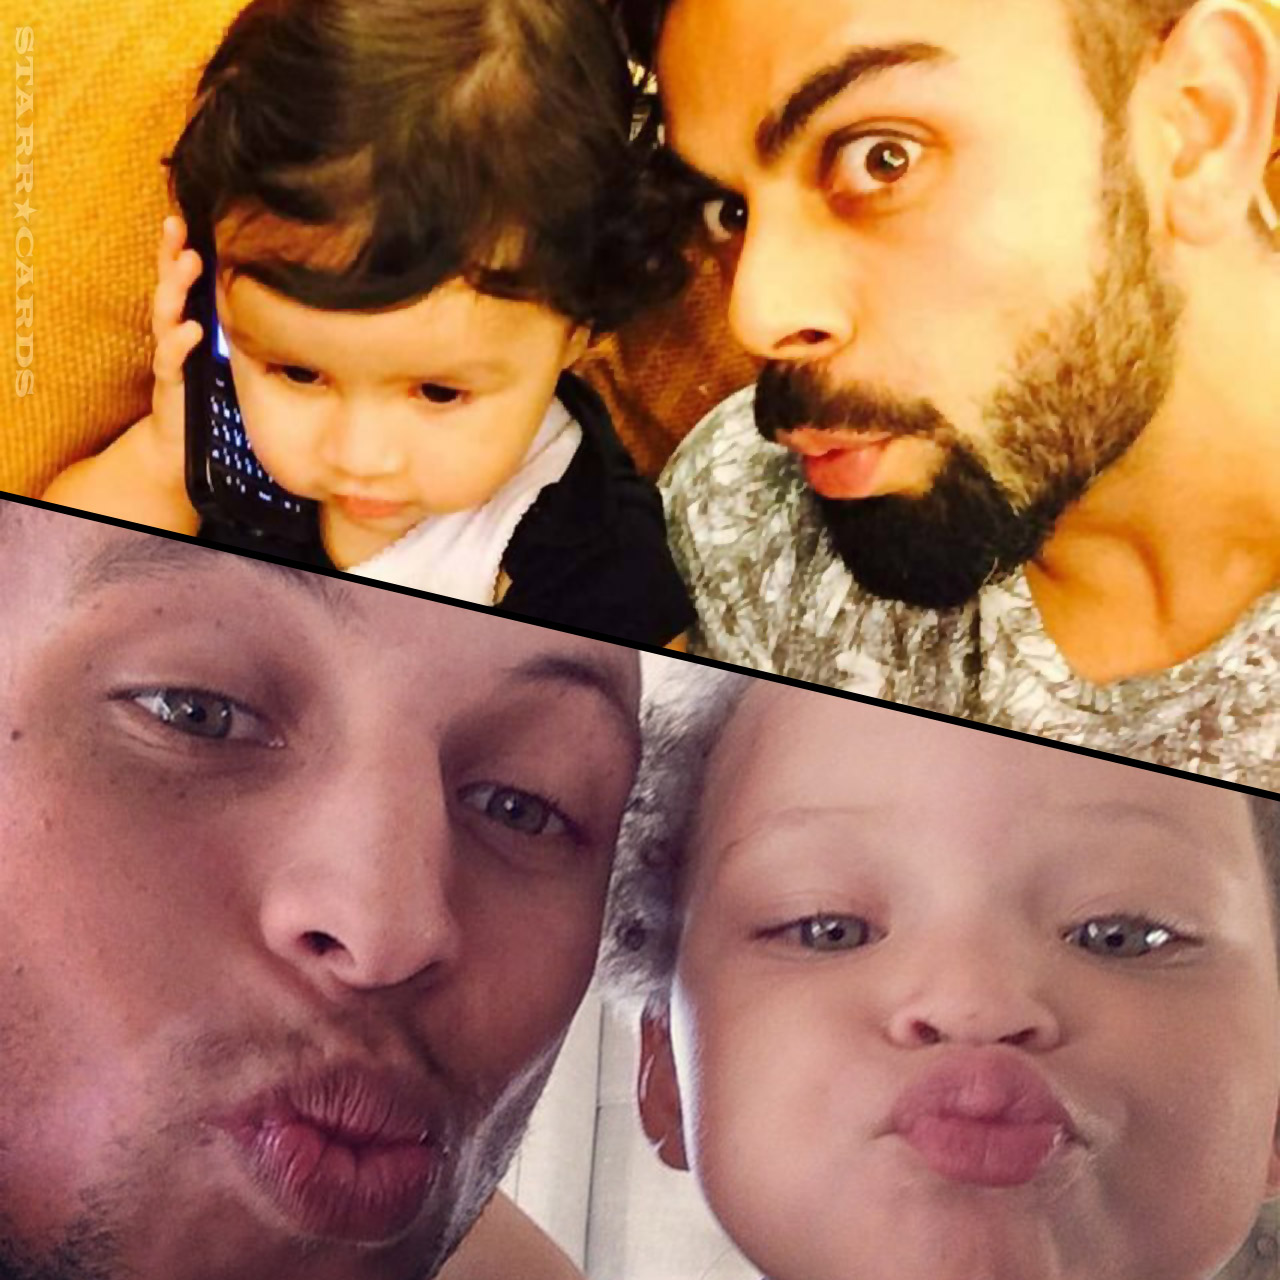 Virat Kohli posing with Zina Dhoni and Steph Curry posing with Riley Curry